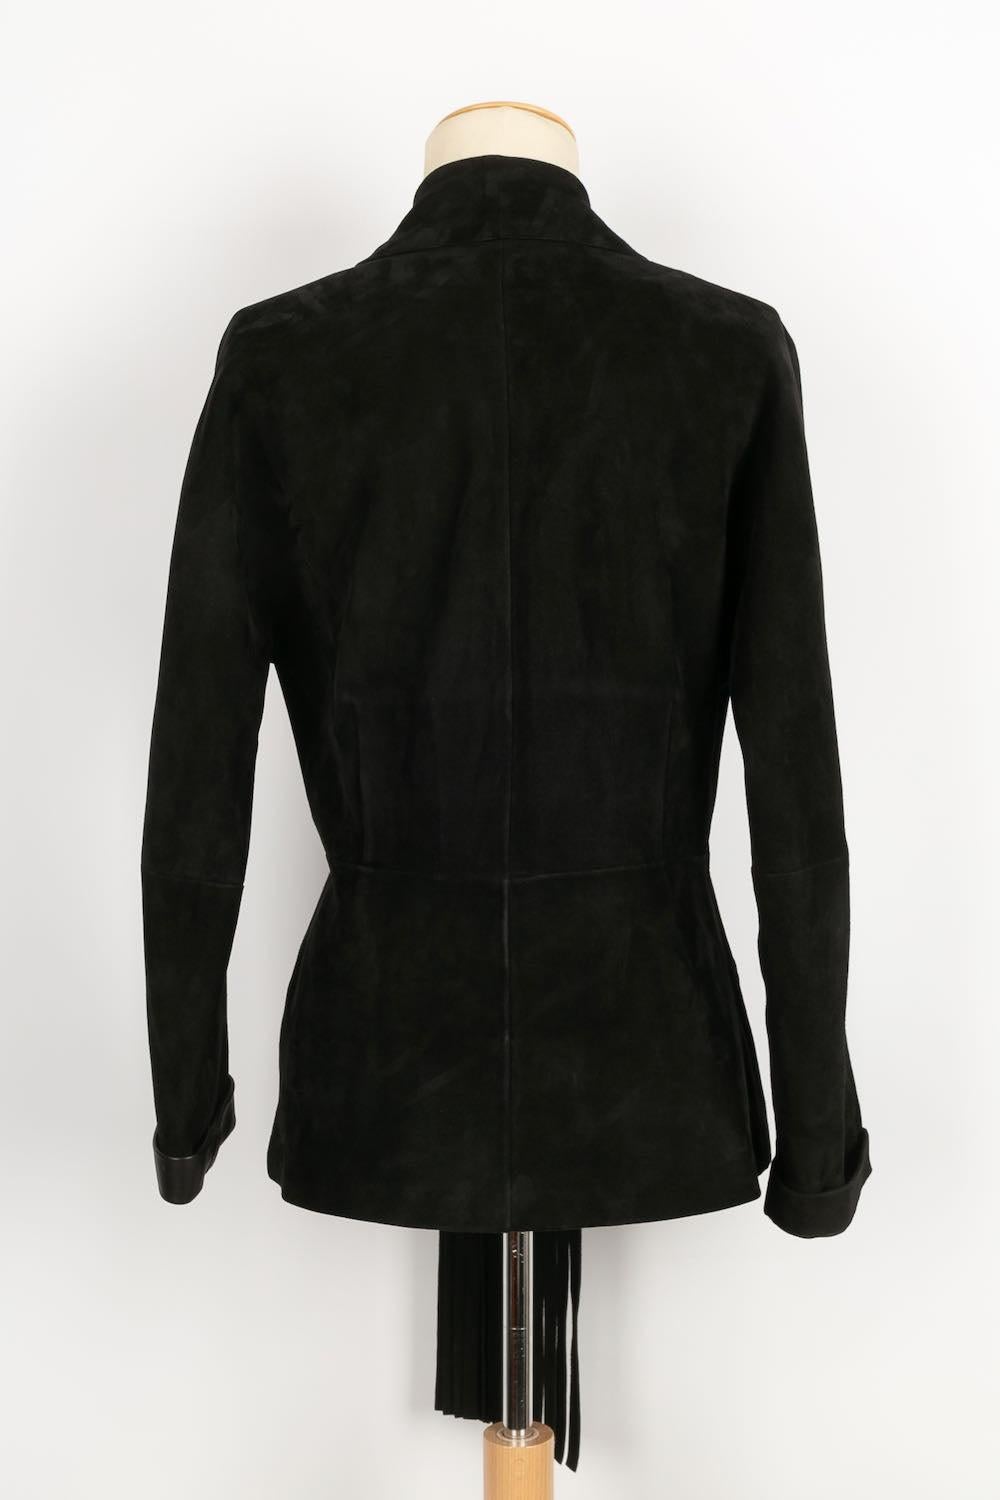 Christian Dior Black Lamb Leather Jacket In Good Condition For Sale In SAINT-OUEN-SUR-SEINE, FR